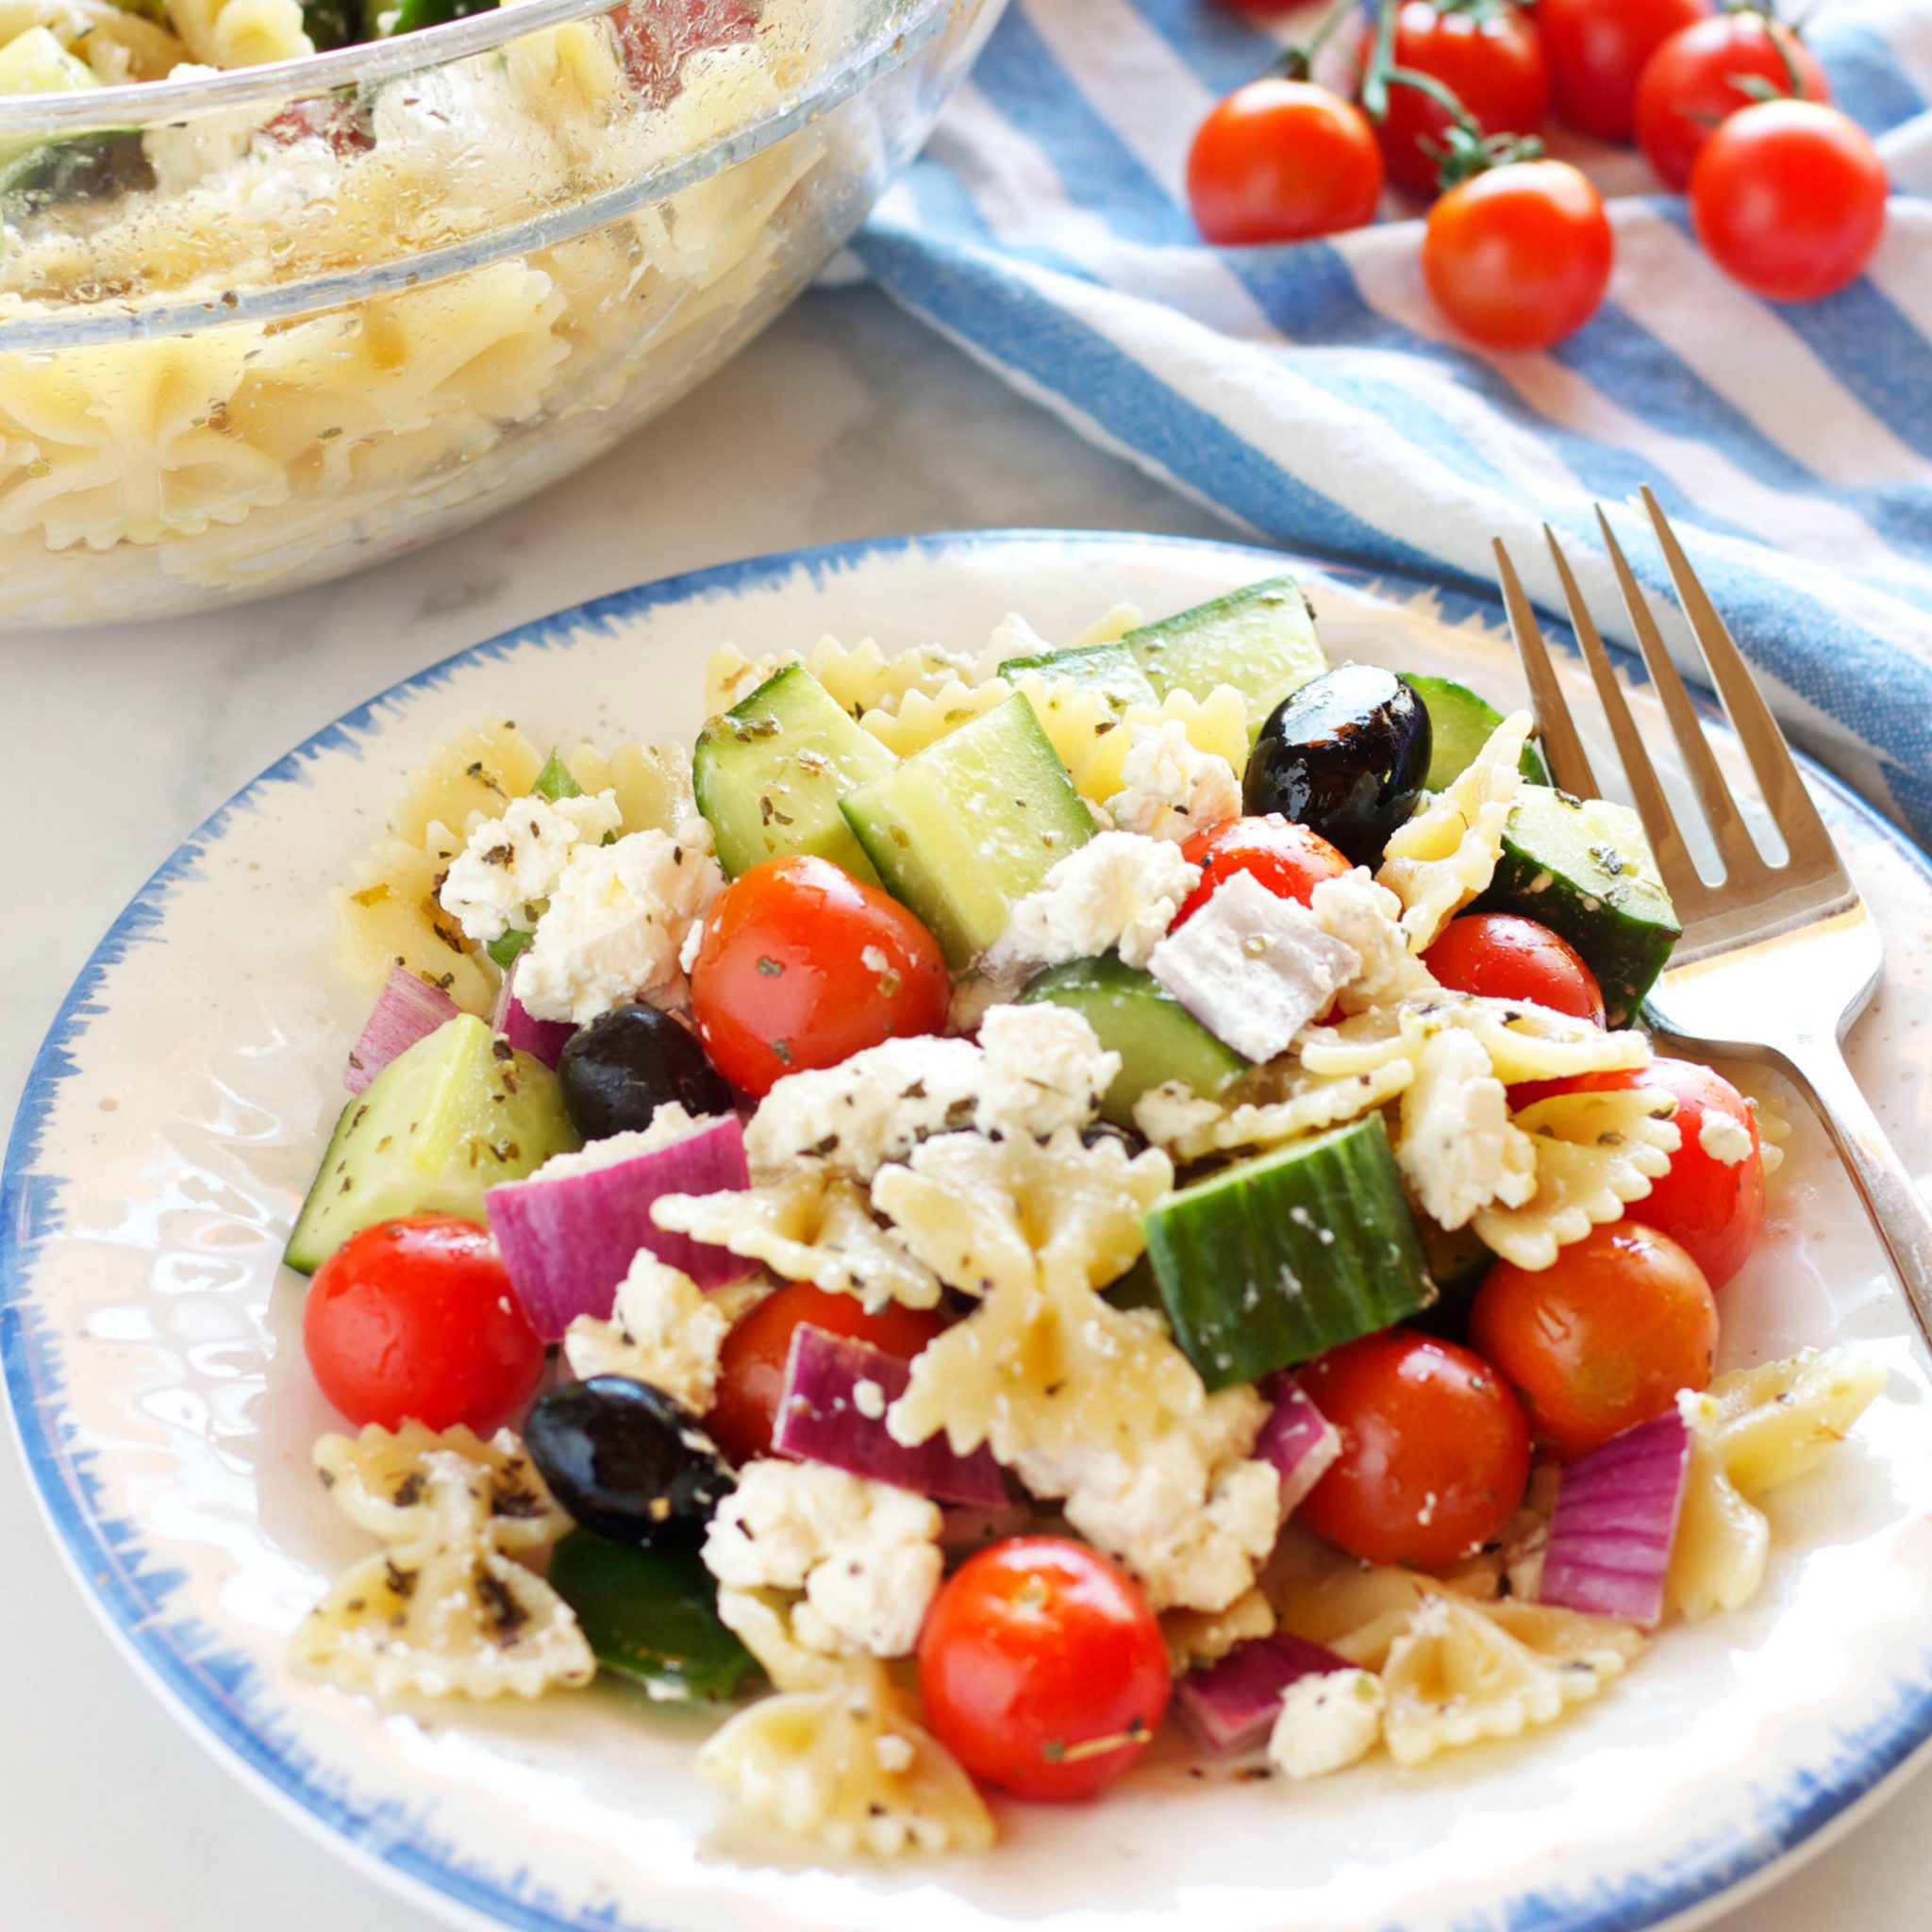 This Quick and Easy Greek Pasta Salad is the perfect easy summer side dish recipe made from healthy ingredients, and bursting with authentic Greek flavors! Recipe from thebusybaker.ca!